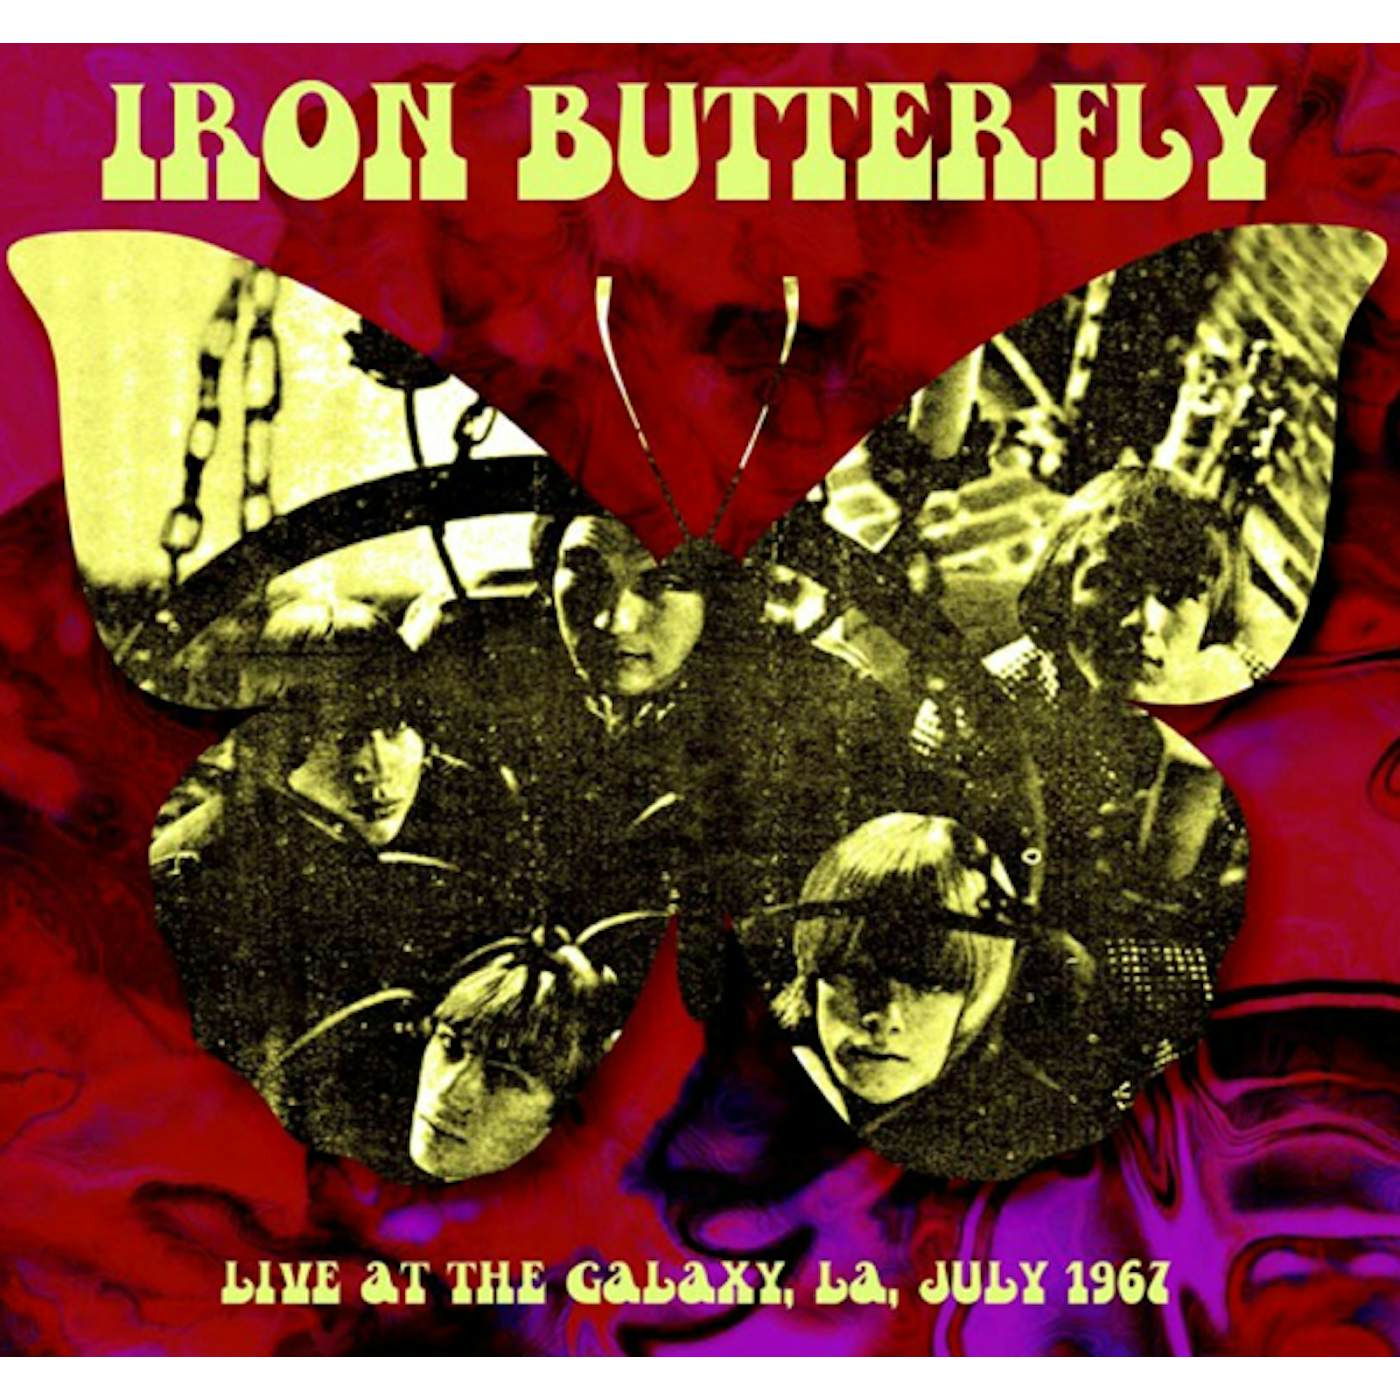 Iron Butterfly LIVE AT THE GALAXY LA JULY 1967 Vinyl Record